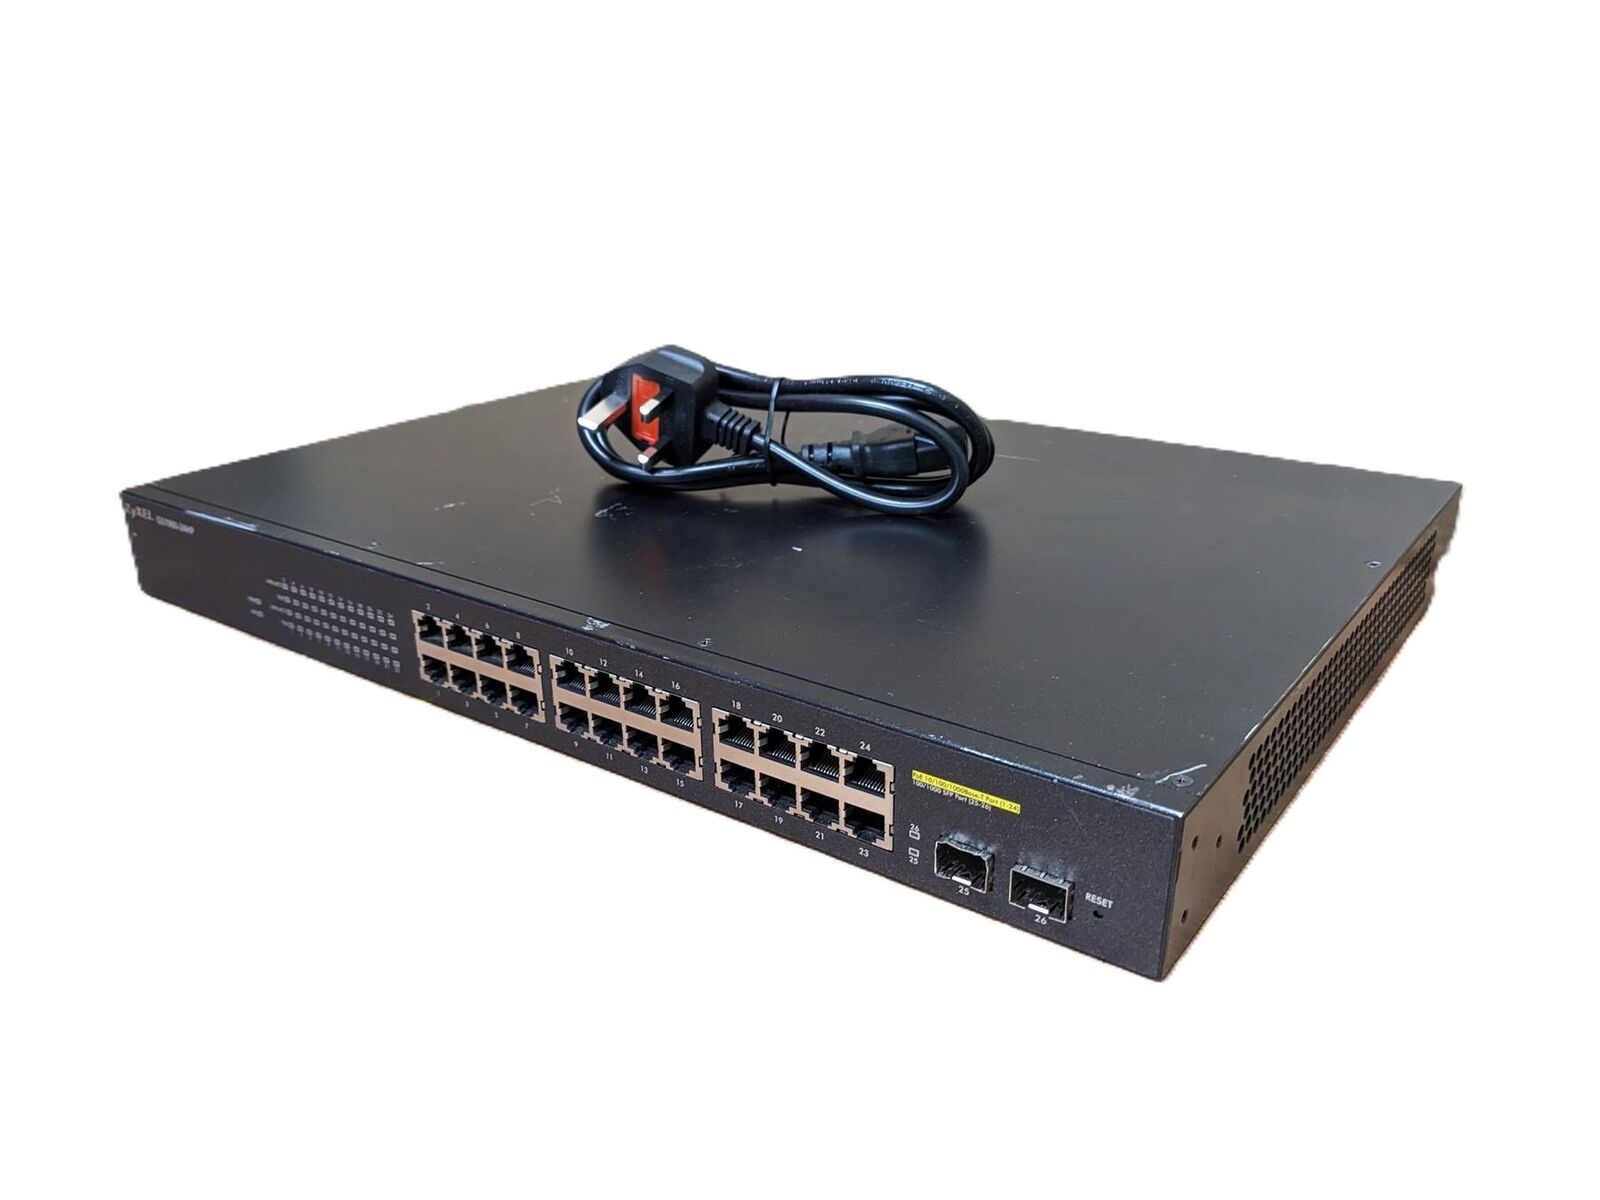 ZYXEL GS1900-24HPv2 24 Port PoE Smart Gigabit Switch + PSU Cable